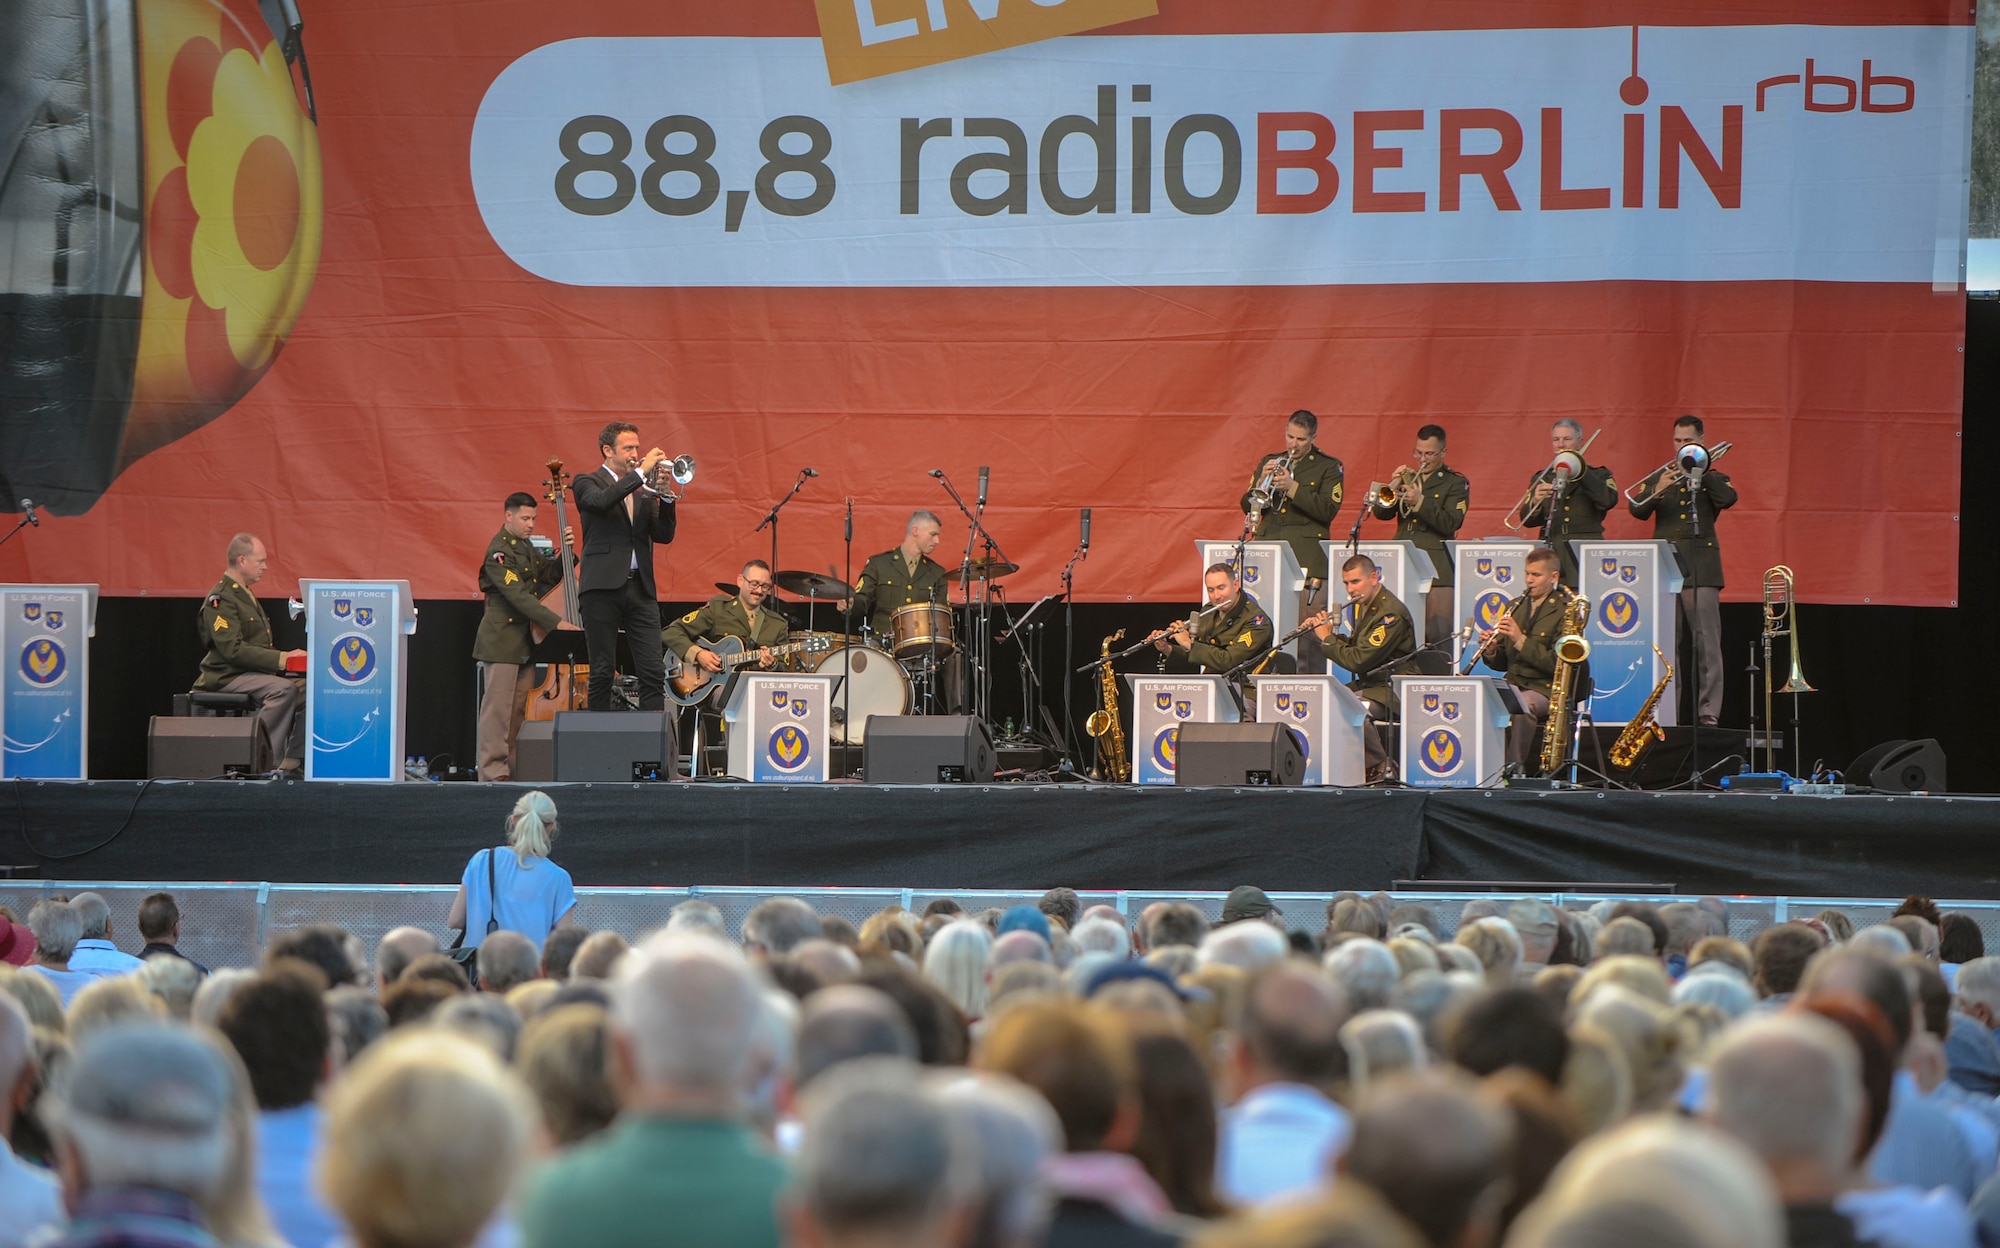 Till Brönner, famous German jazz trumpeter, and U.S. Air Forces in Europe Band members perform a jazz song during a Berlin Airlift 70th Anniversary commemoration in Berlin, Germany, Sept. 4, 2018. The USAFE Band and Brönner performed together to not only commemorate the Berlin Airlift but also the friendship and partnership between the U.S. and Germany. (U.S. Air Force photo by Staff Sgt. Timothy Moore)